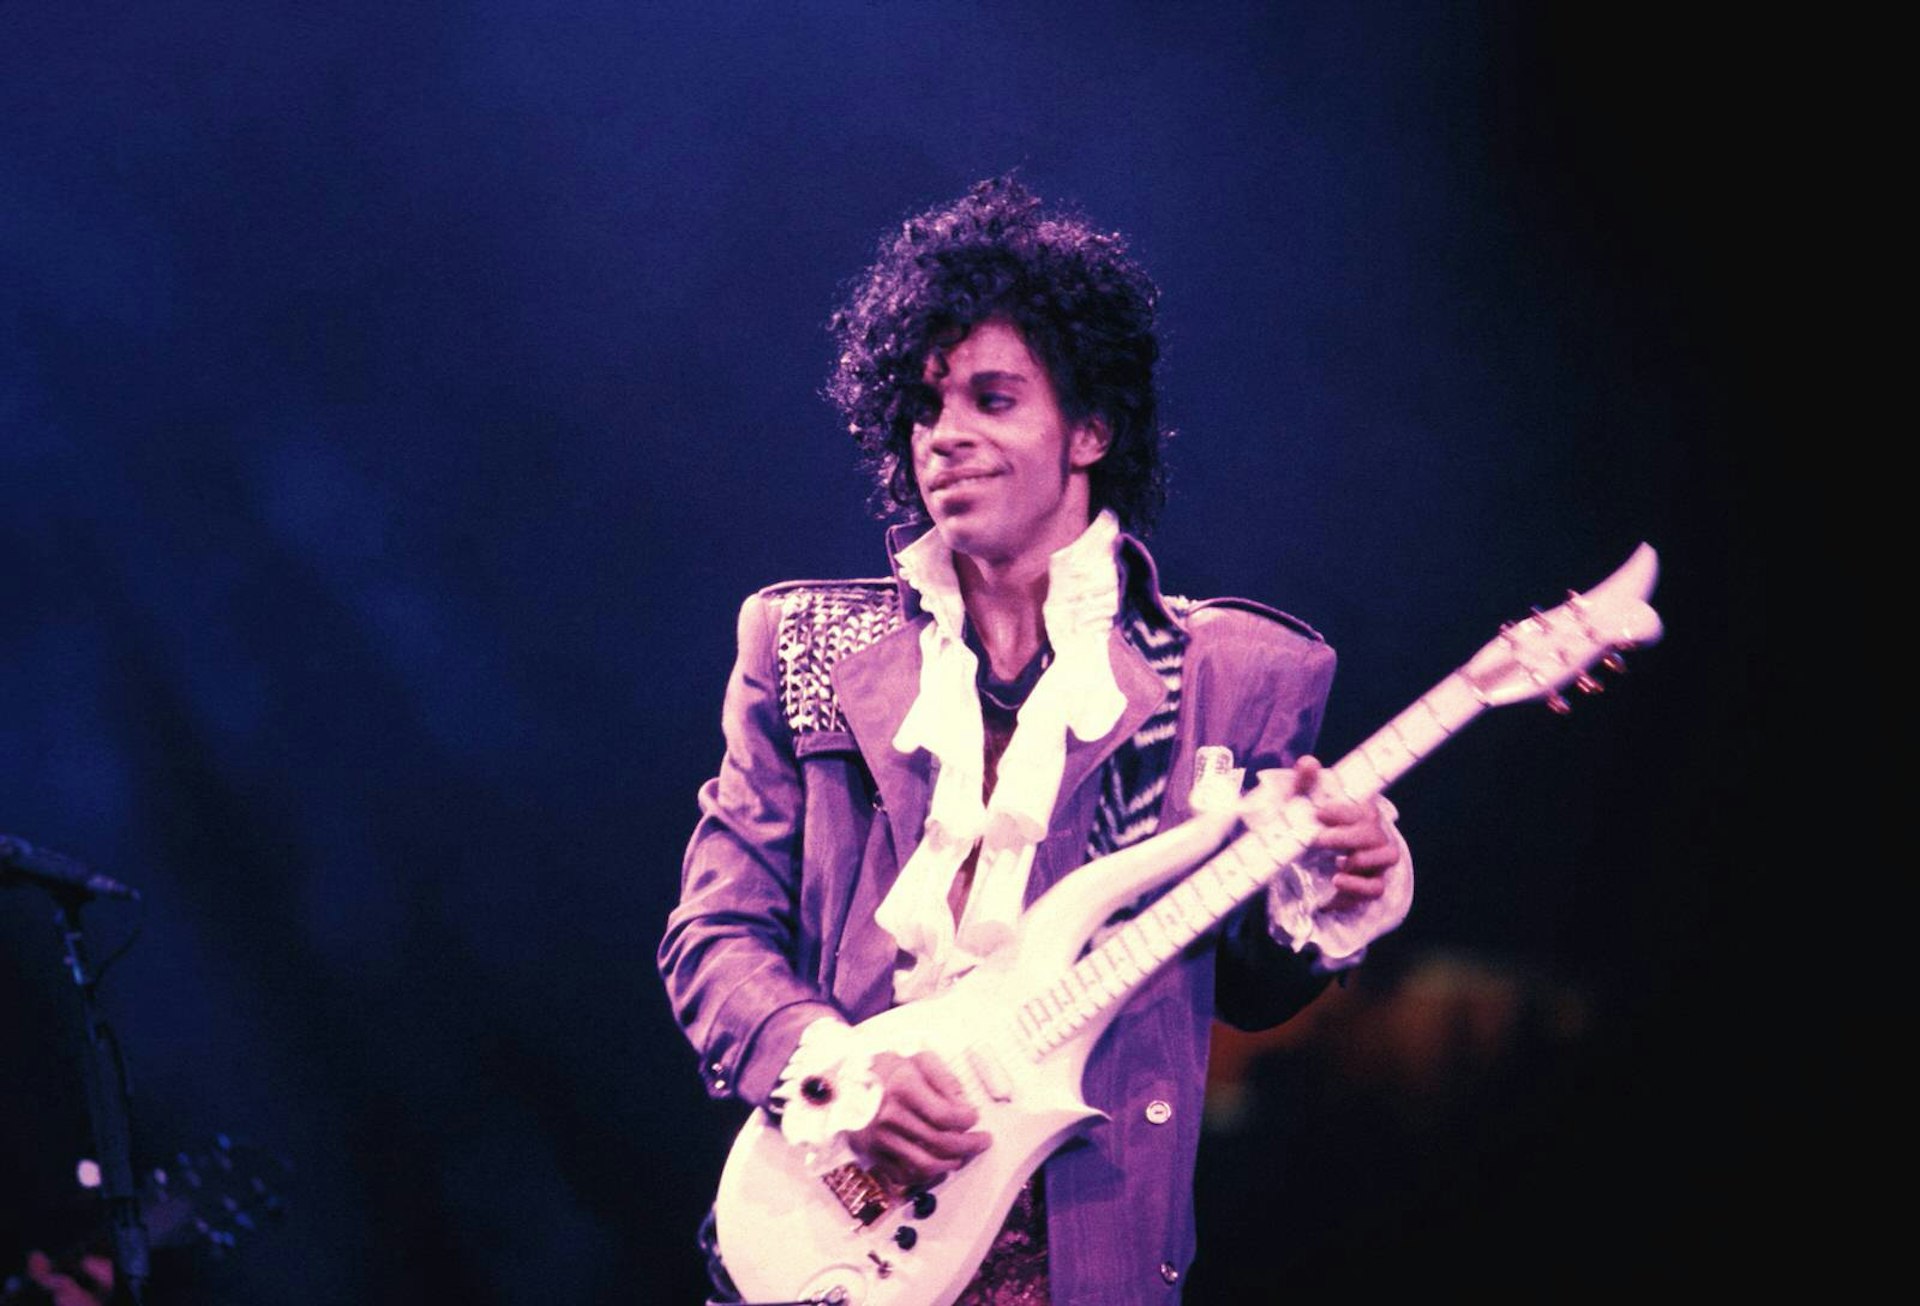 Prince performing on stage at the Ritz Club holding a white electric guitar 